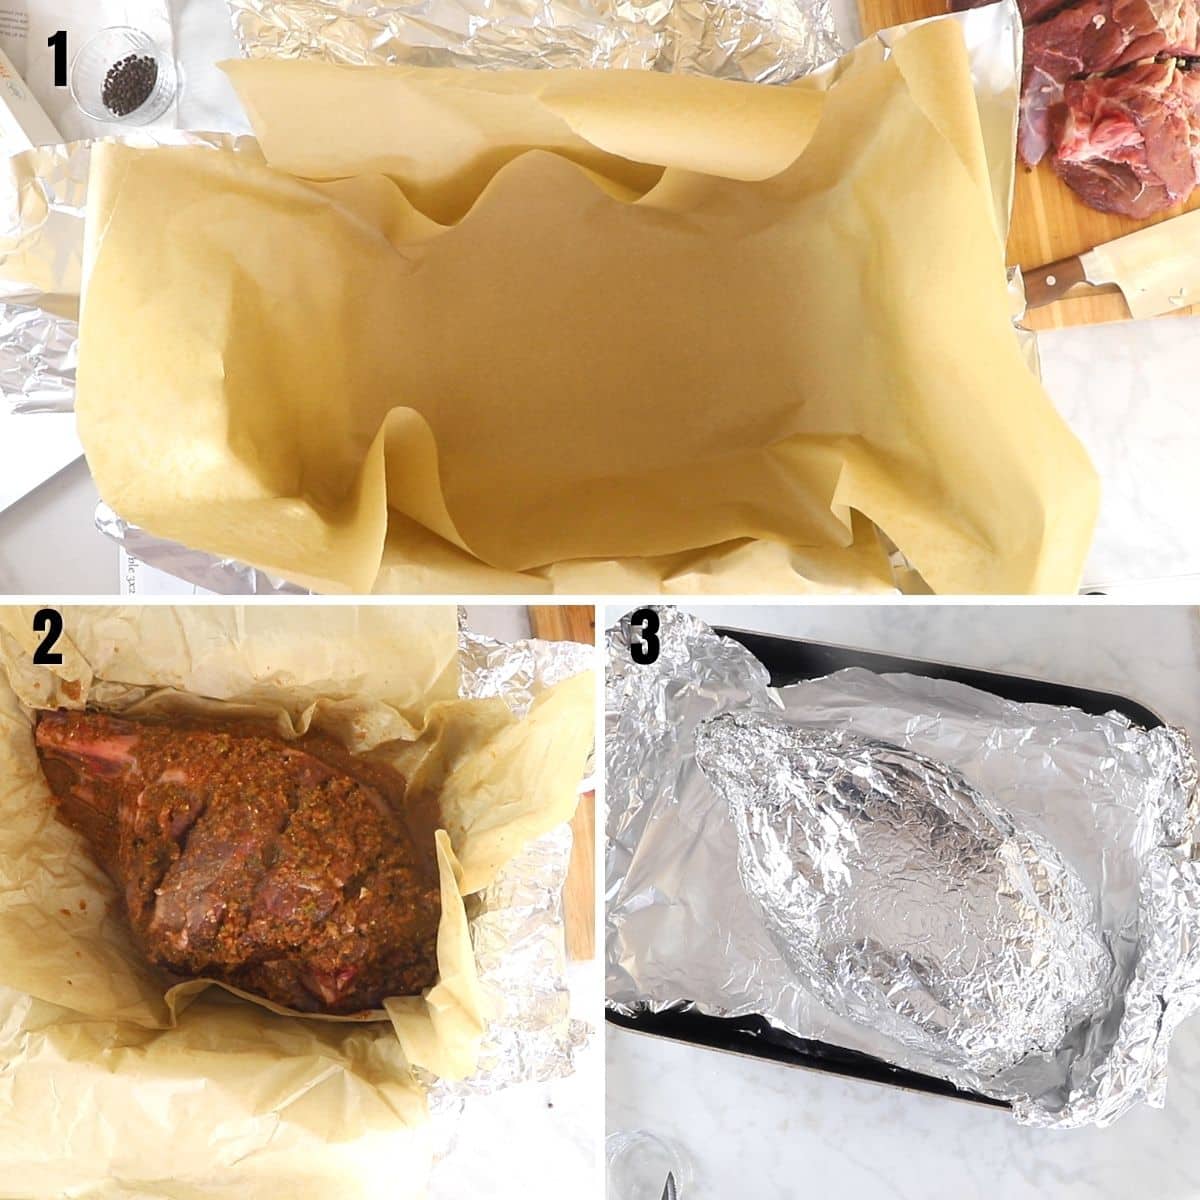 A collage of 3 images showing how to marinade and wrap a leg of lamb.